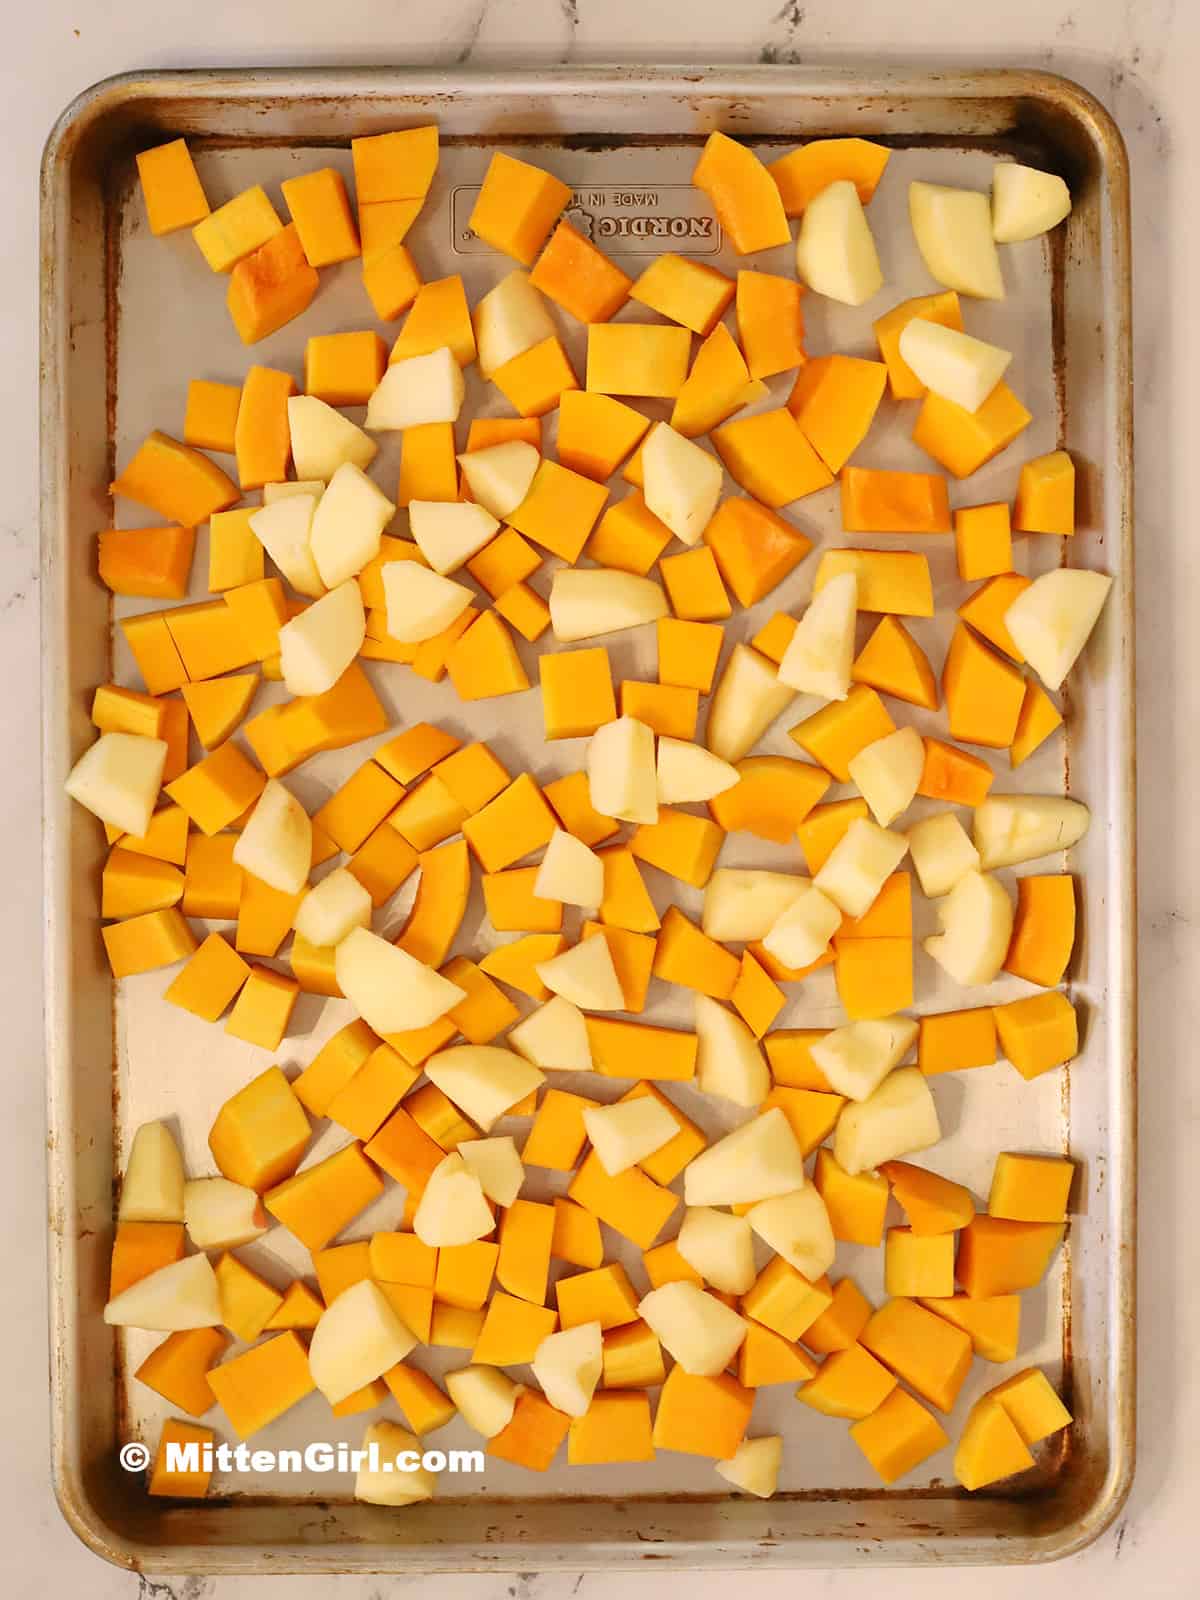 Apples and squash on a sheet pan.